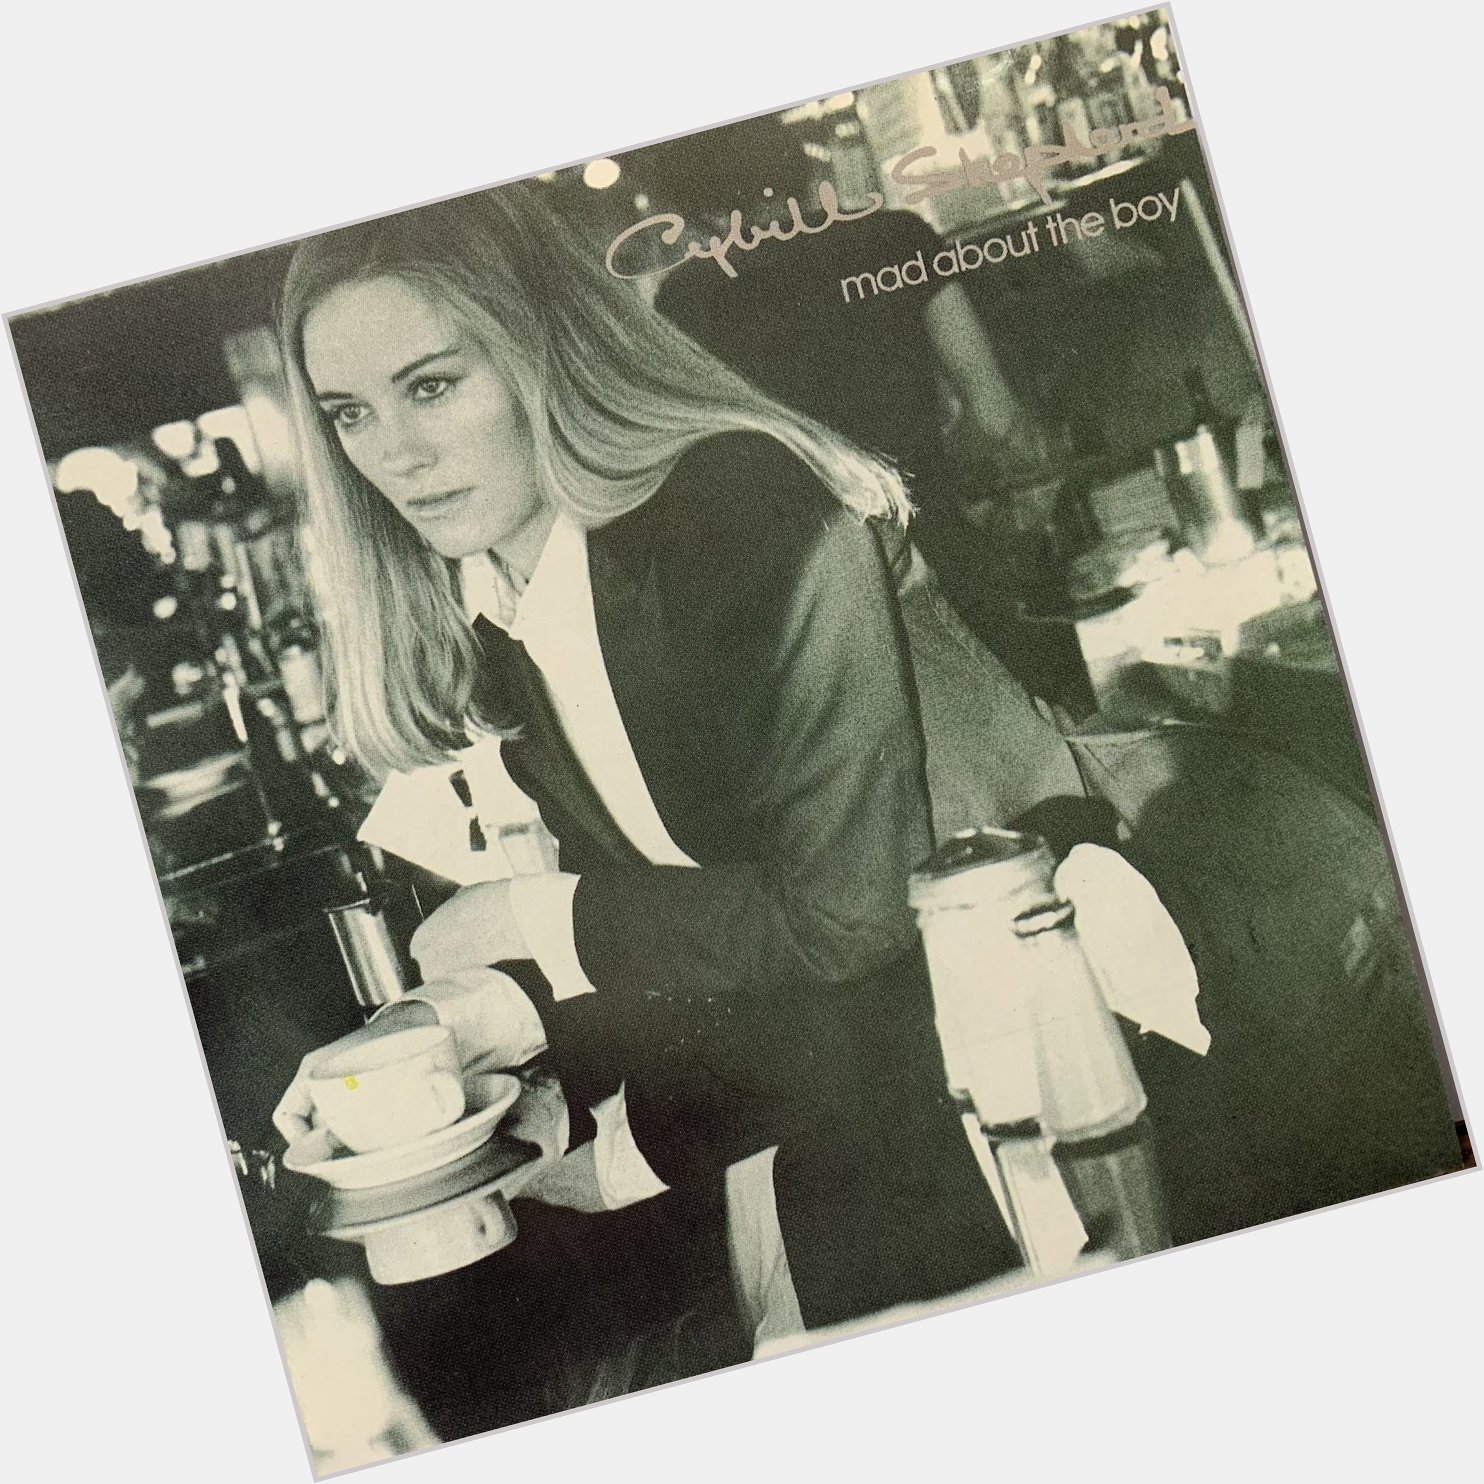 Mad About The Boy 
Cybill Shepherd 
           & Stan Getz 
Recorded May 1976
Happy birthday  